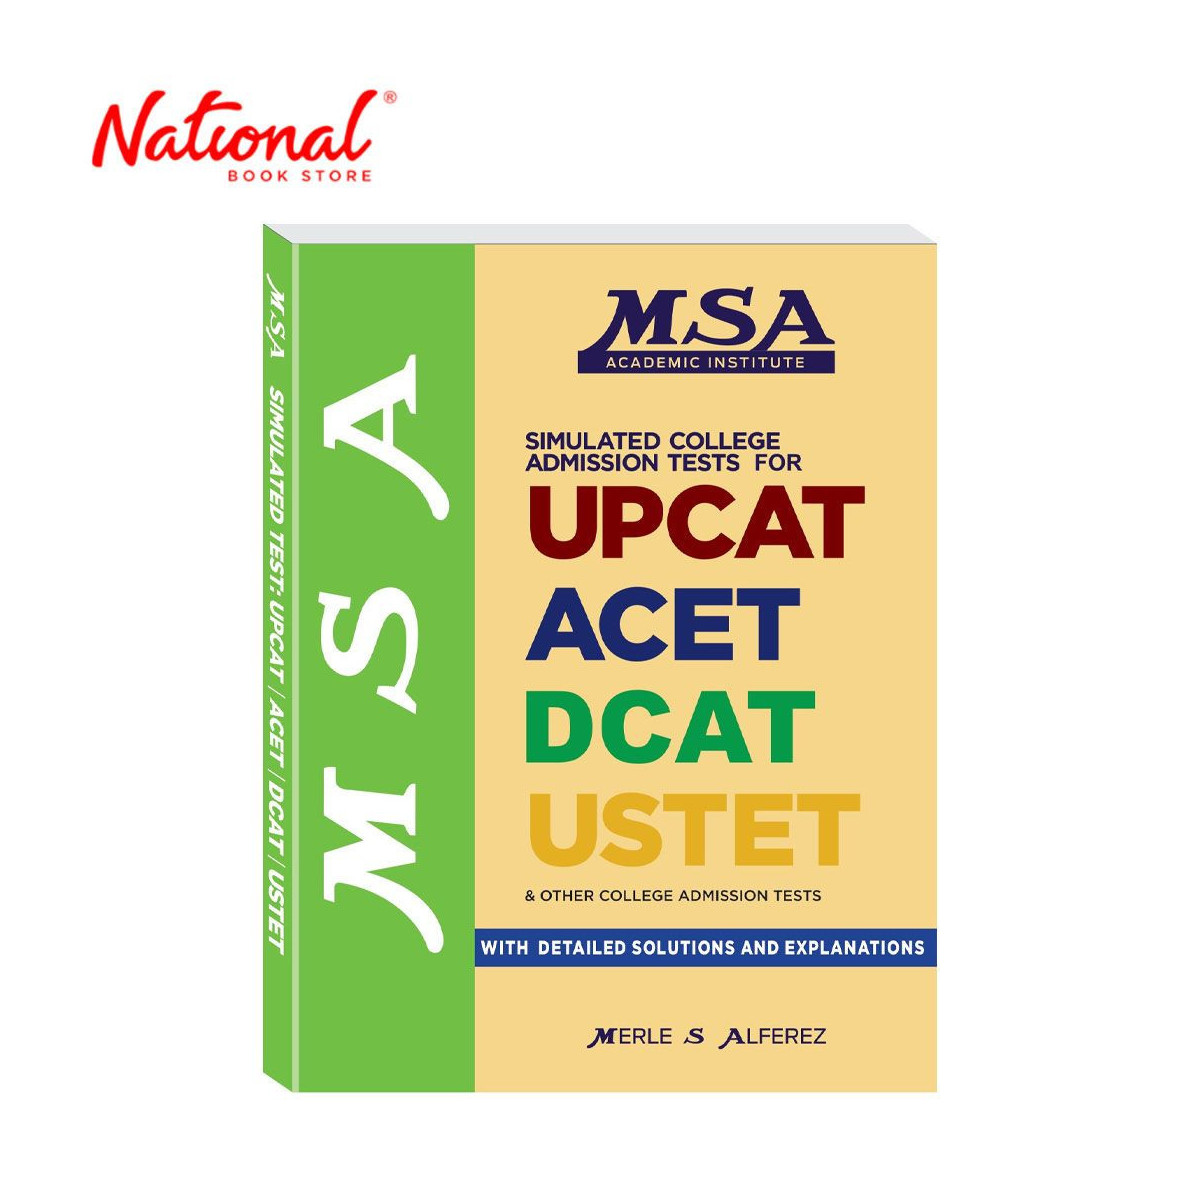 MSA Simulated College Admission Tests for UPCAT ACET DCAT USTET by Merle S. Alferez - Reviewer